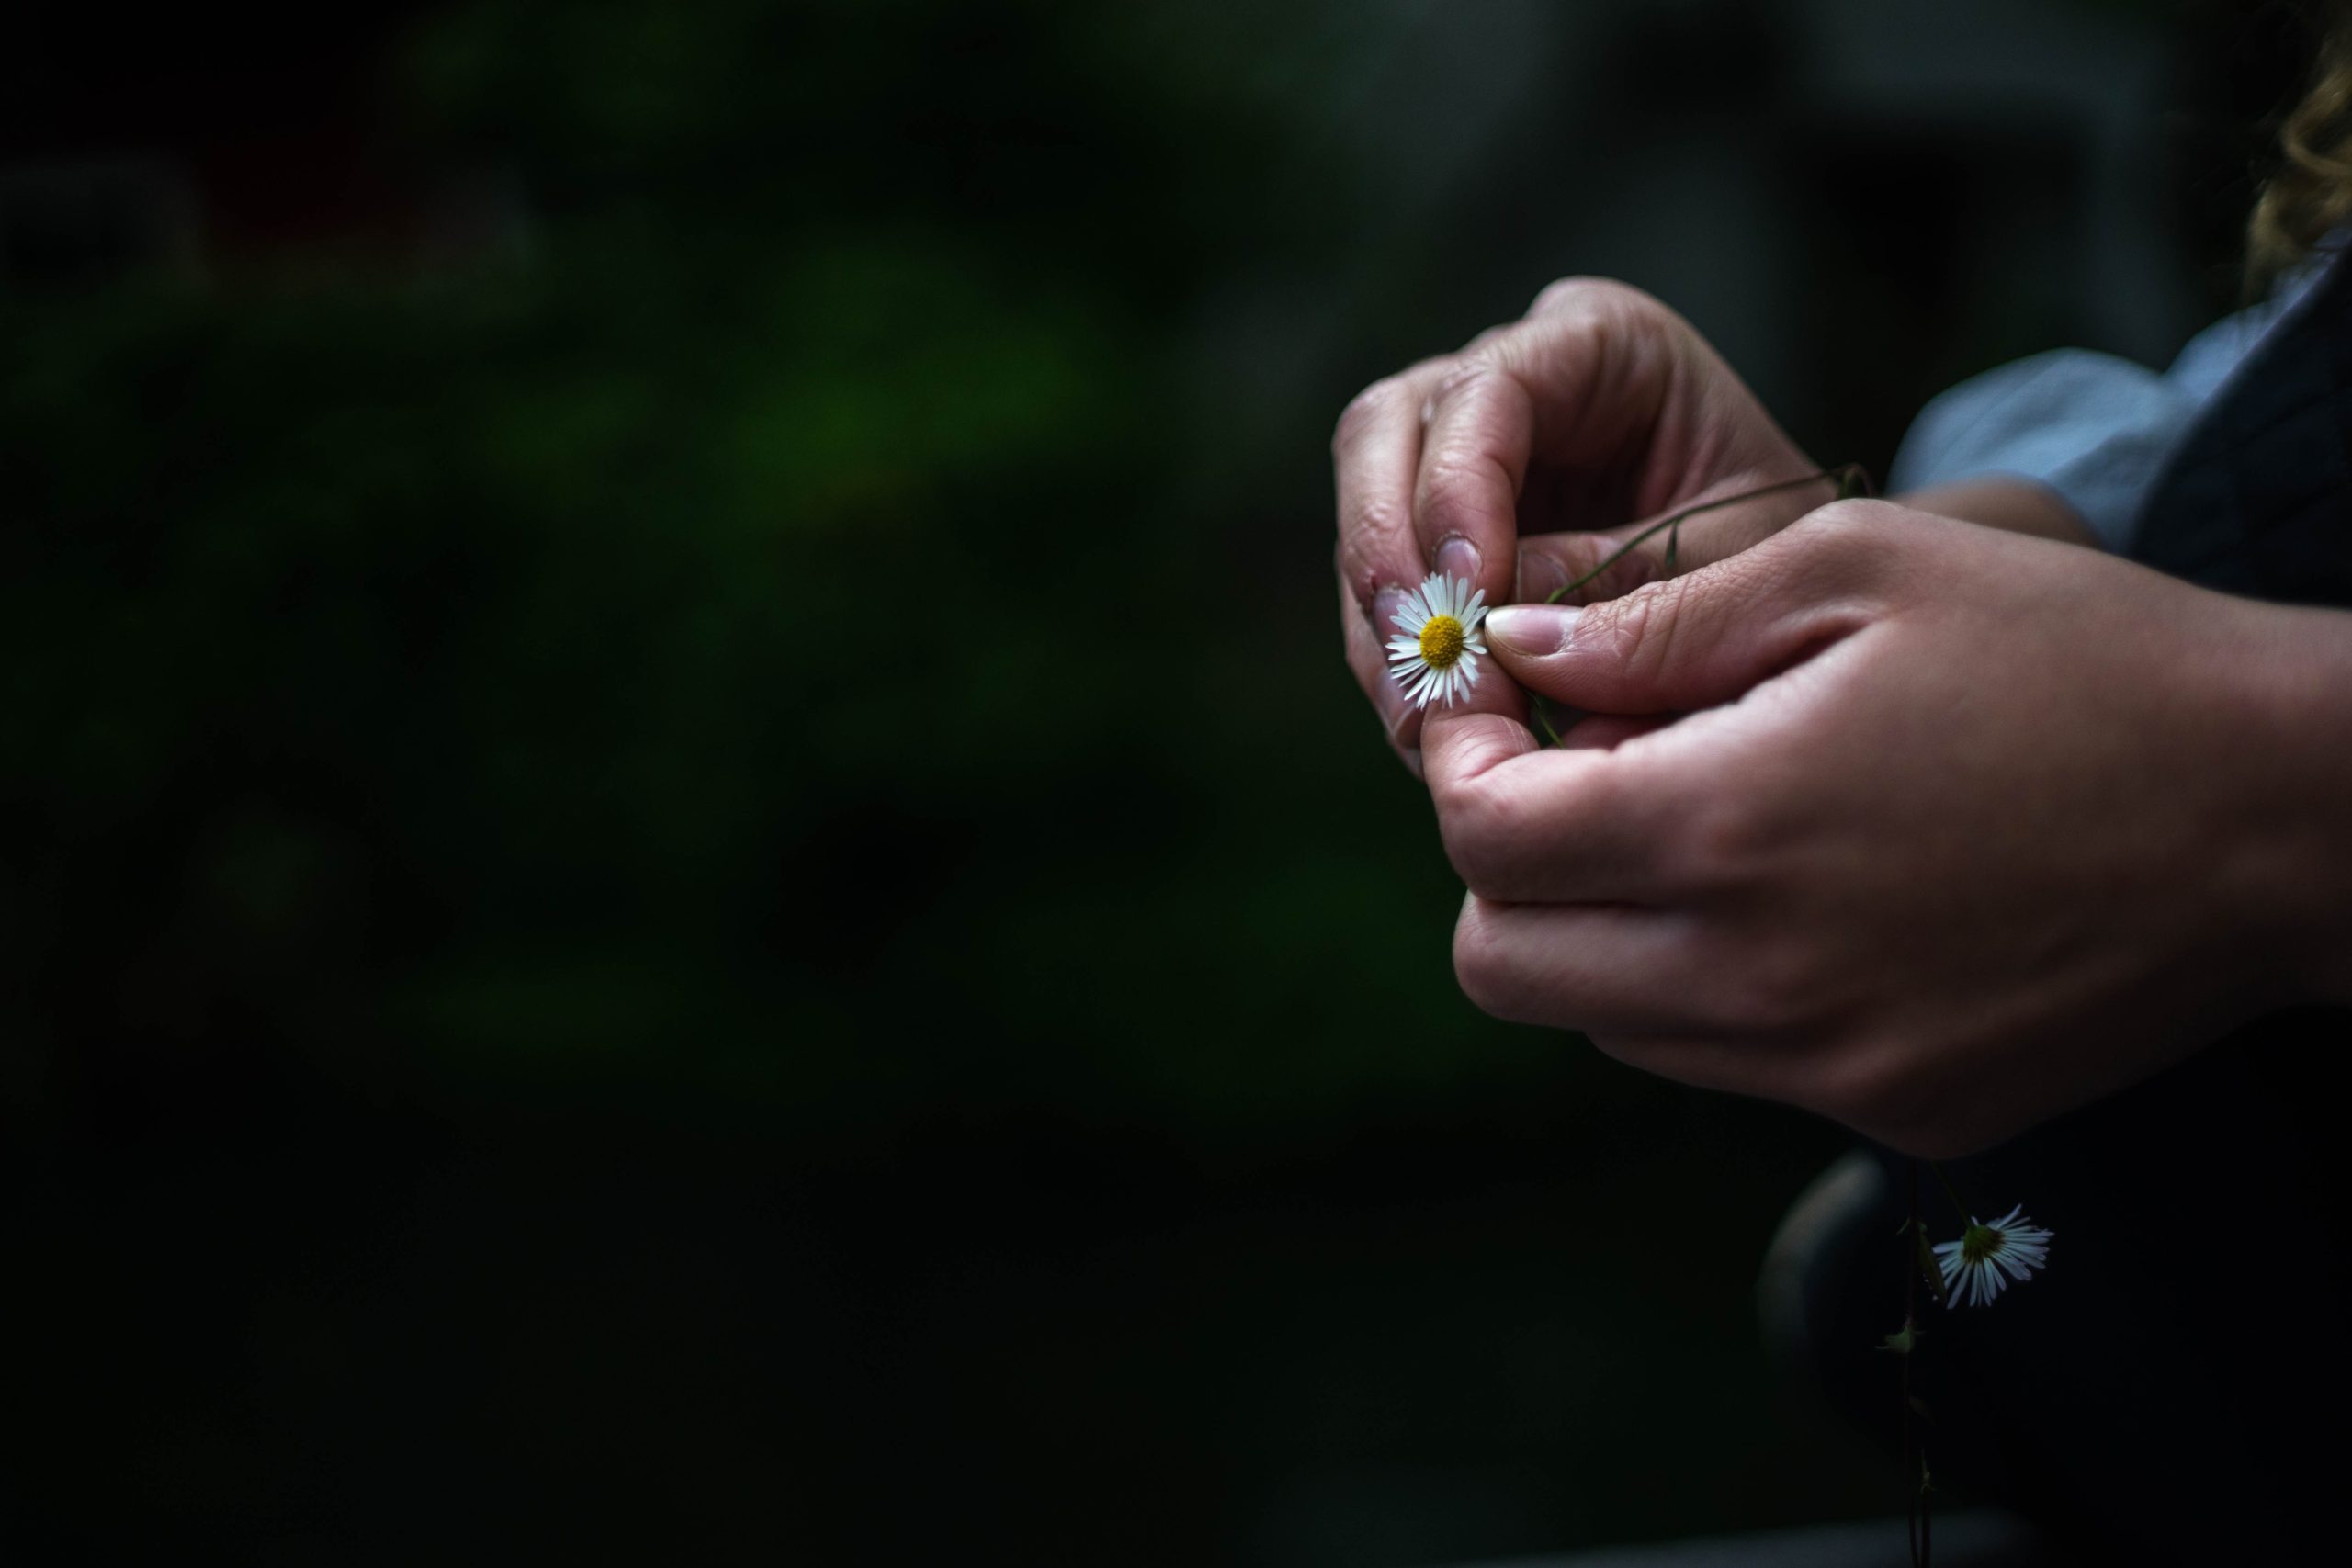 Woman's hands holding small white flower in the darkness